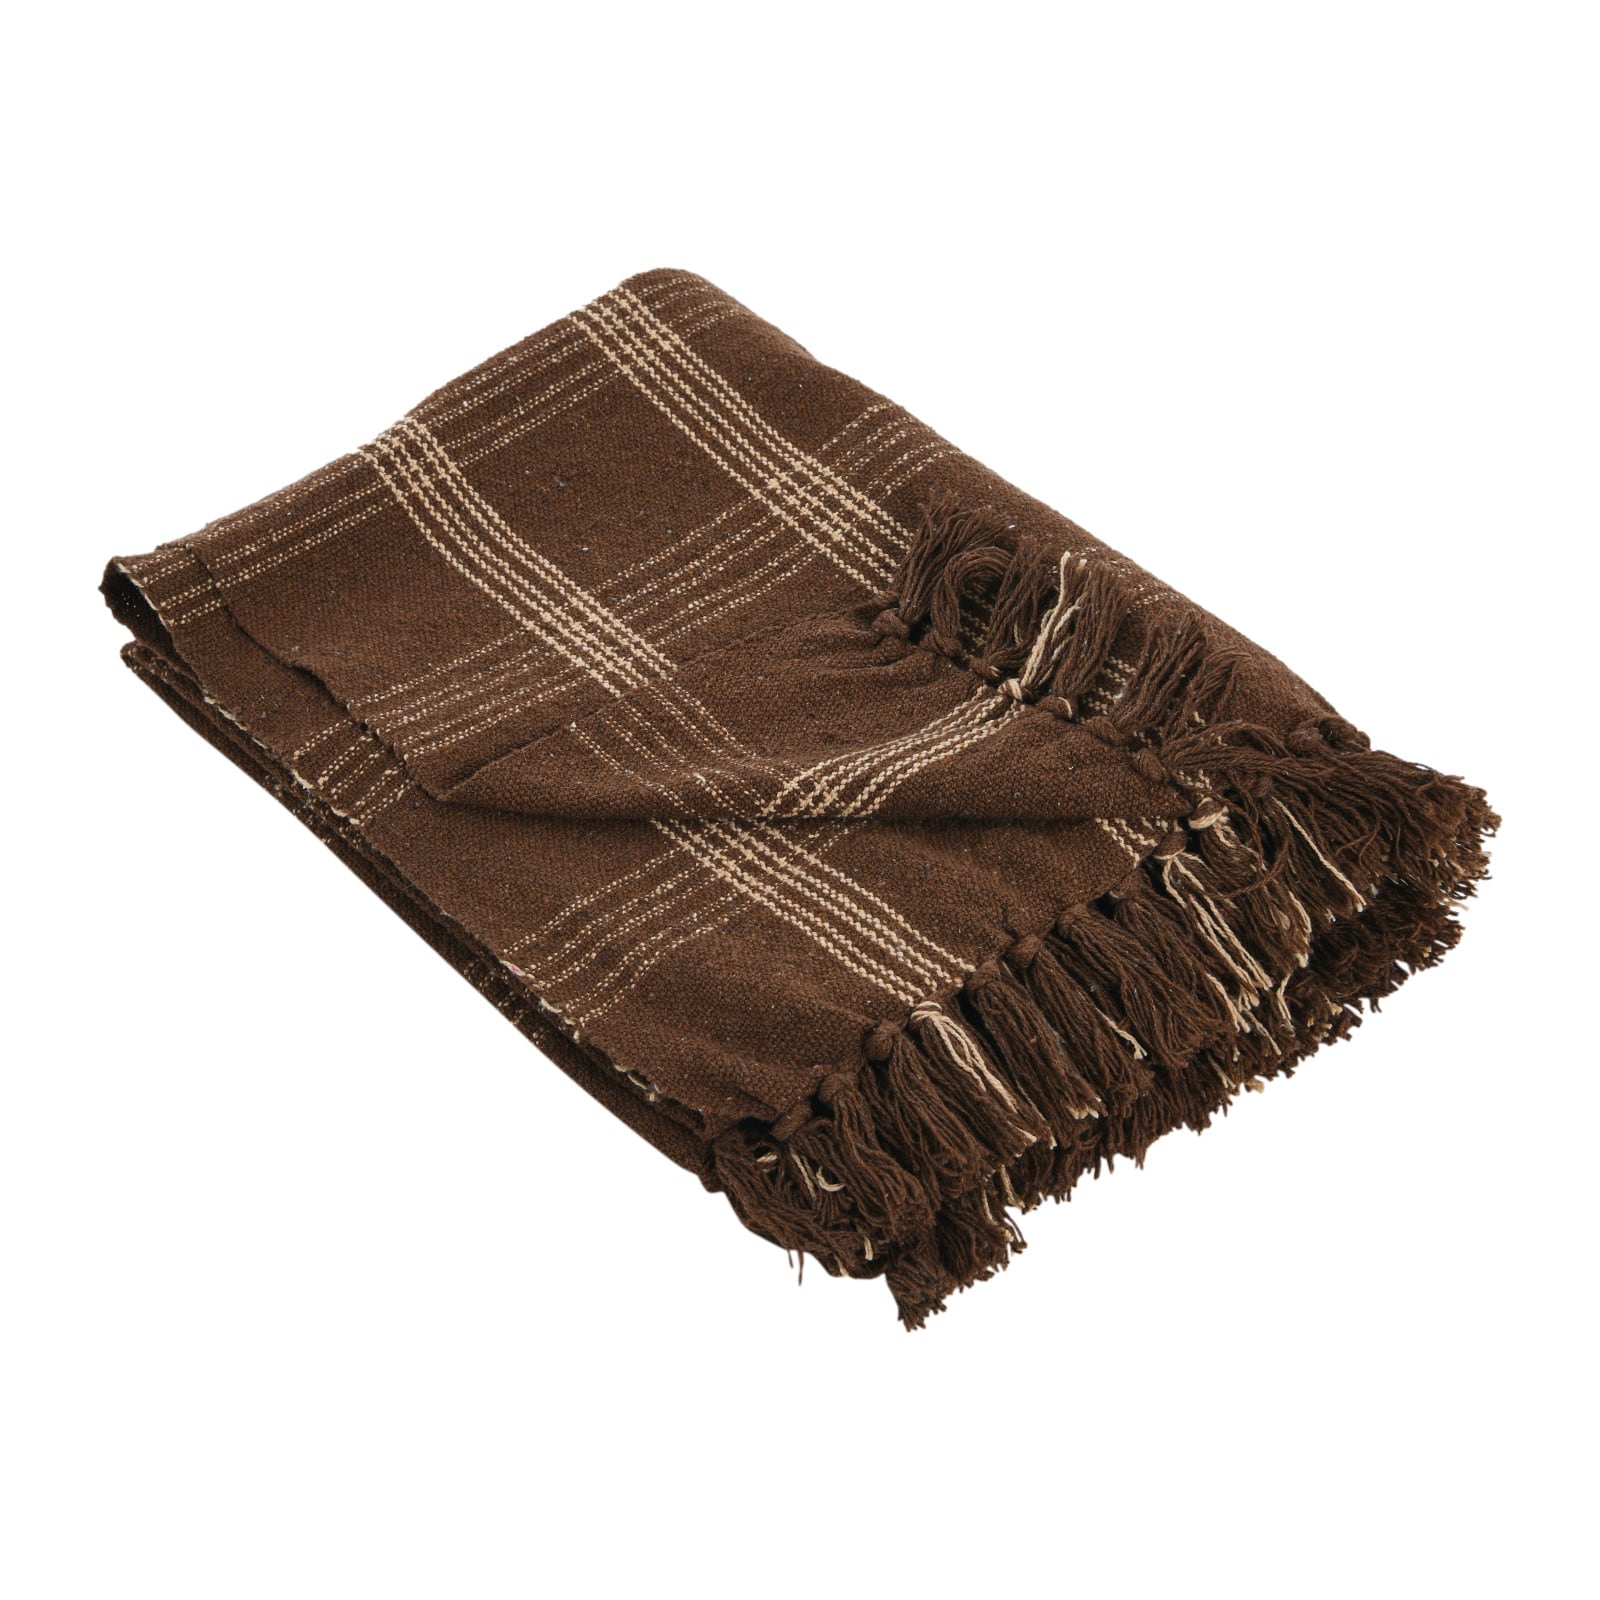 Plaid Recycled Cotton Blend Throw Blanket with Fringe